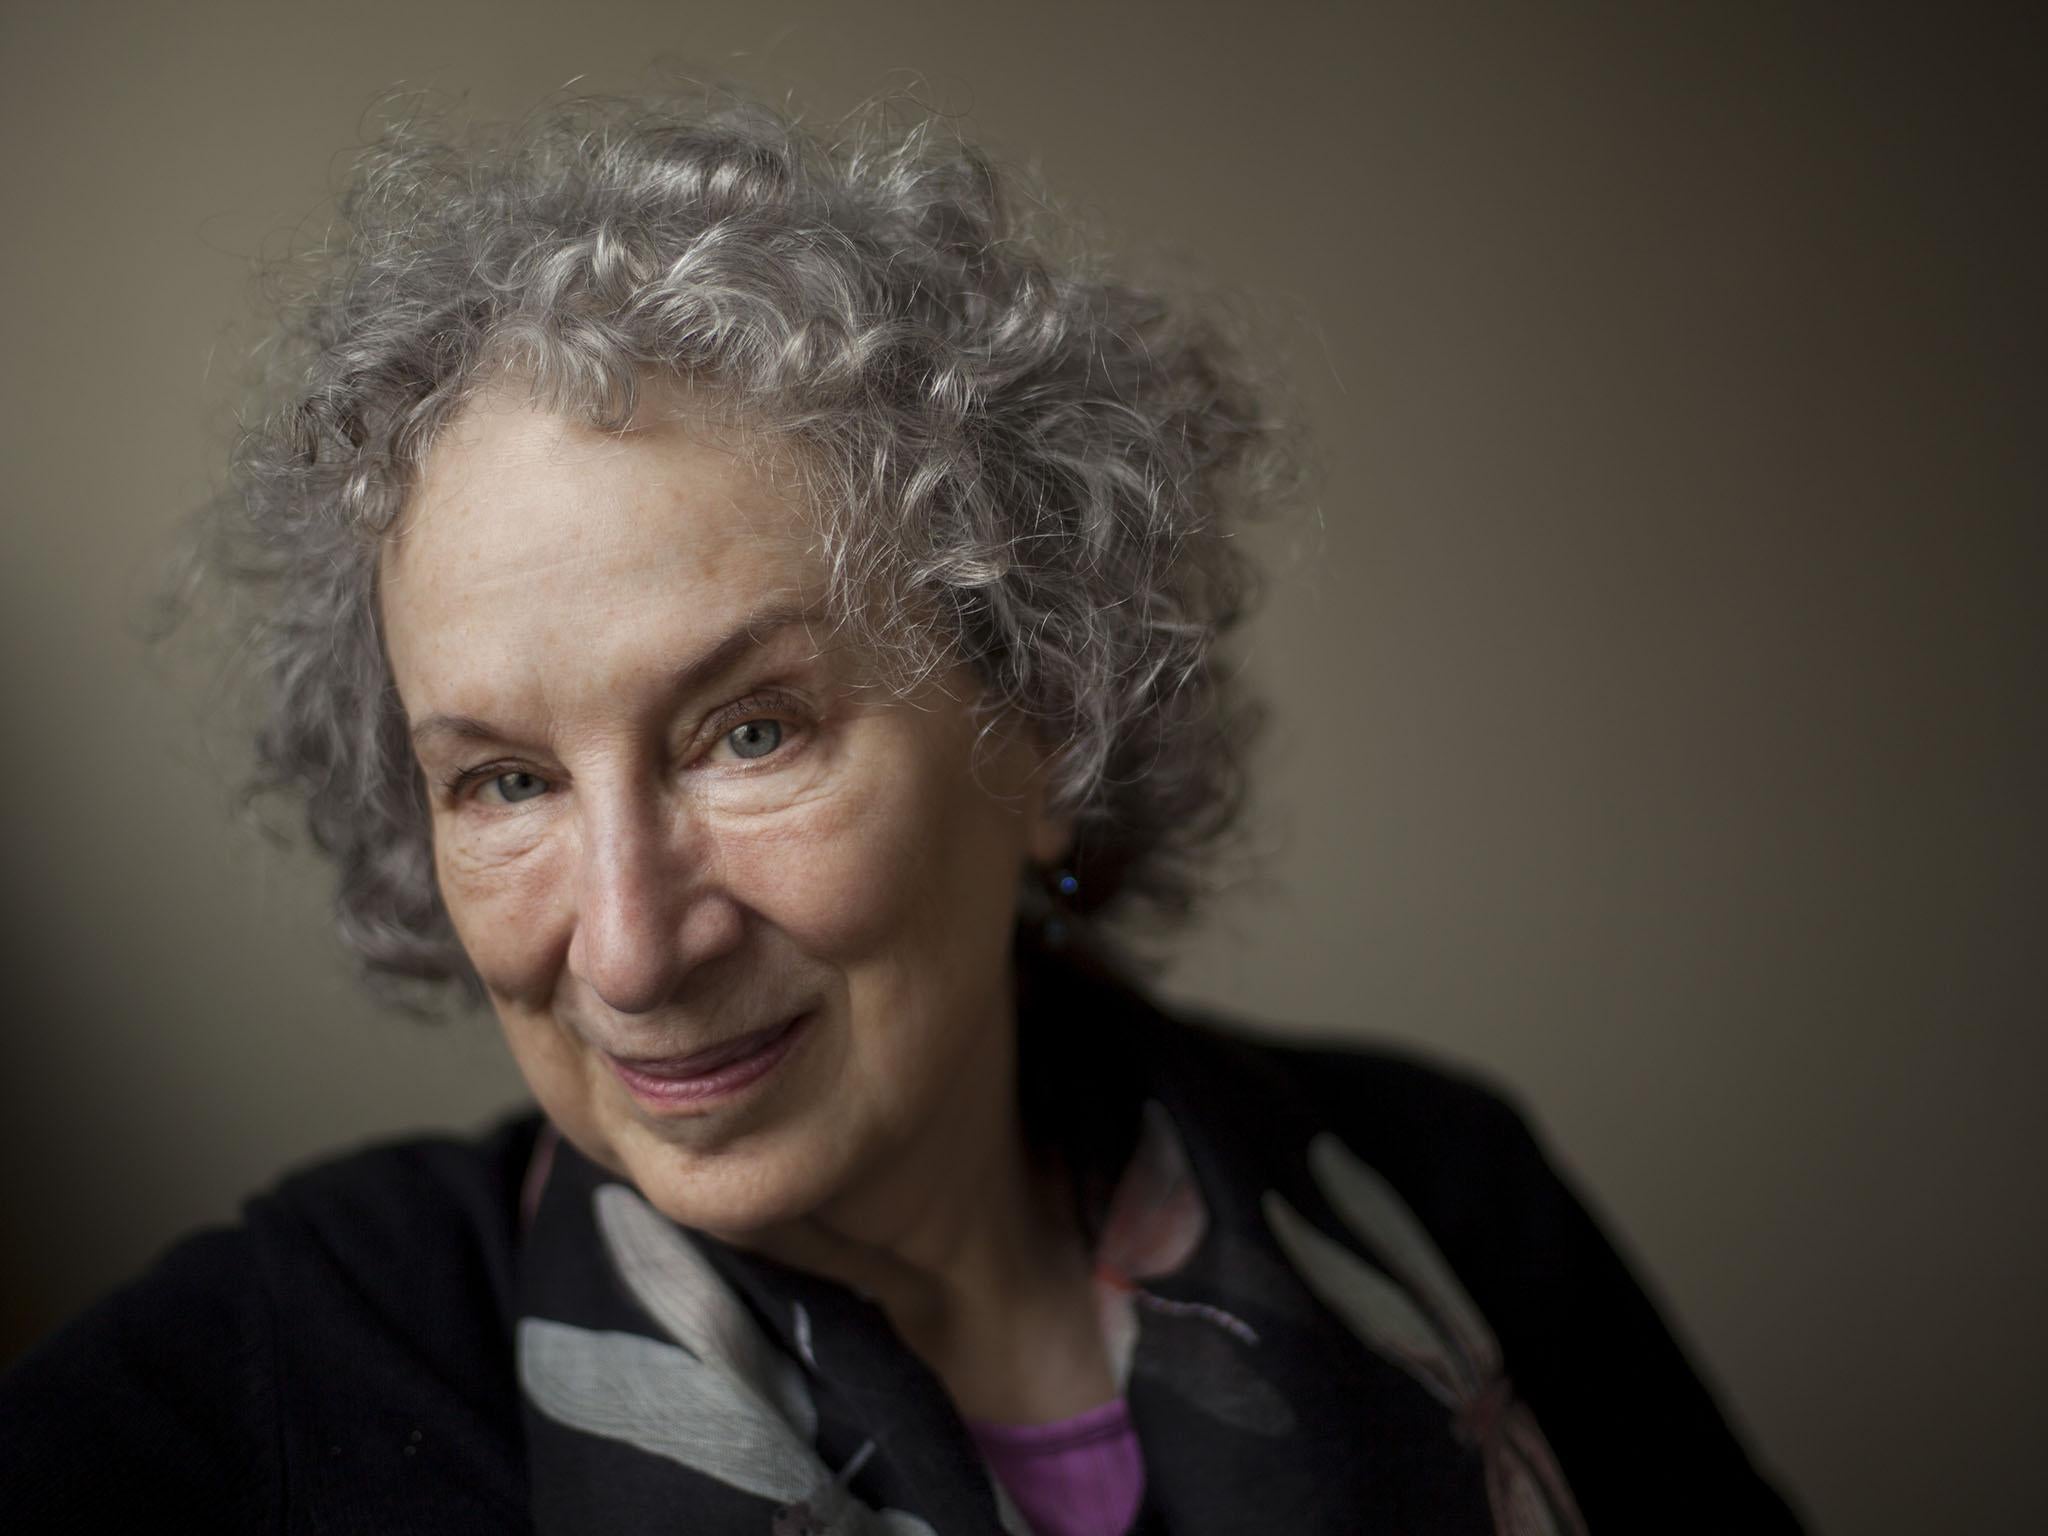 Atwood’s horrifically imagined future hinges on increased surveillance and censorship